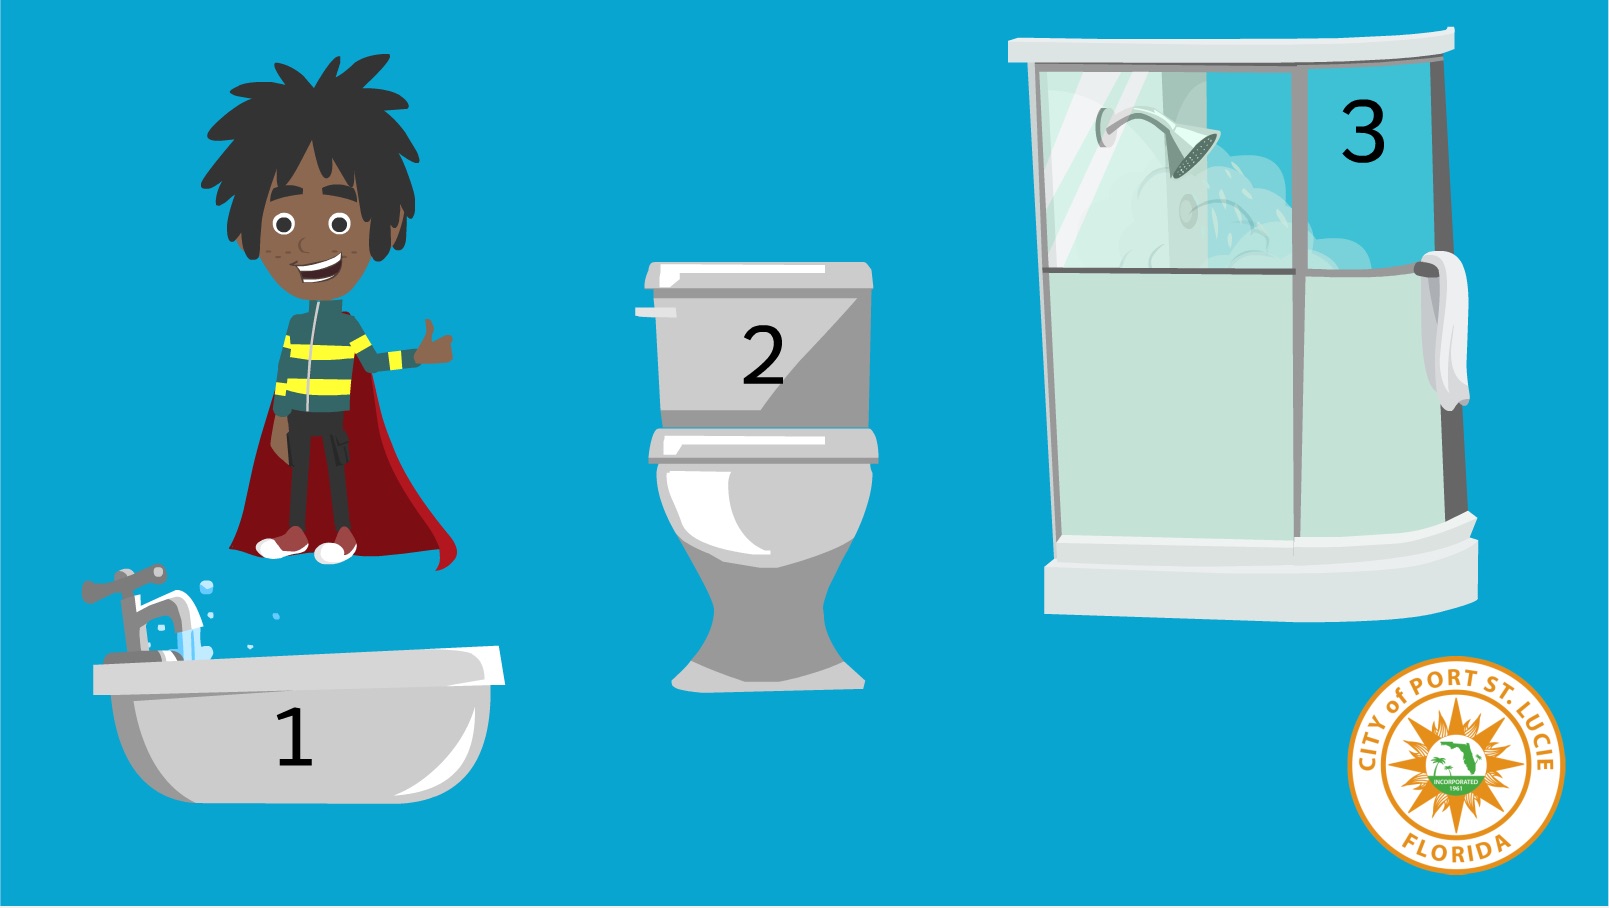 Screen shot from animation showing a kid giving thumbs up in the bathroom